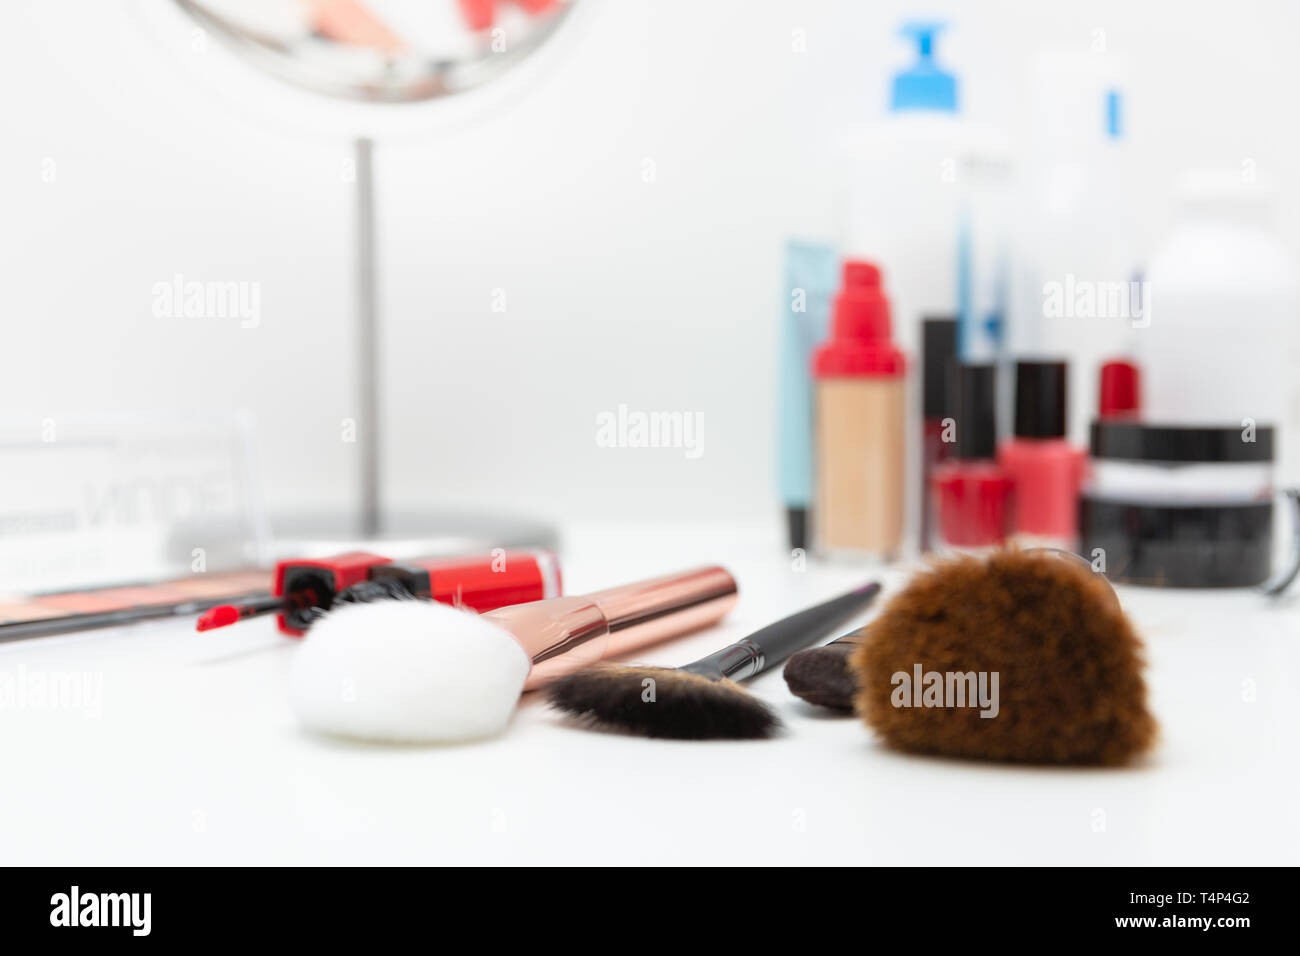 Decorative cosmetics, makeup products and brushes on white background Stock Photo